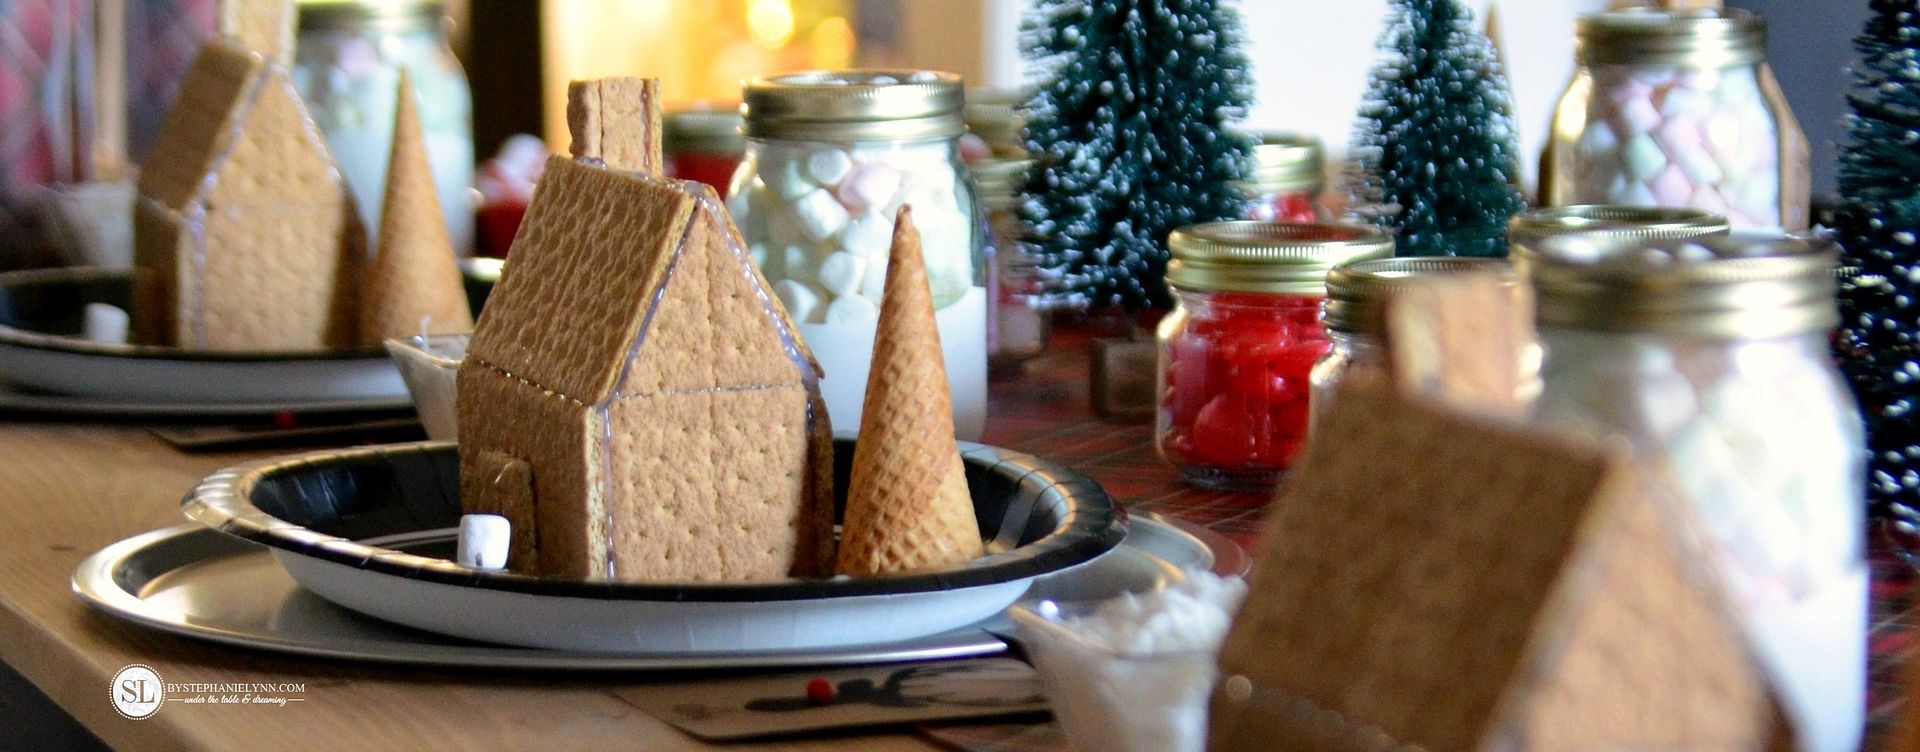 Gingerbread House Decorating Party for Kids | Graham Cracker Gingerbread Houses #snackpackmixins 